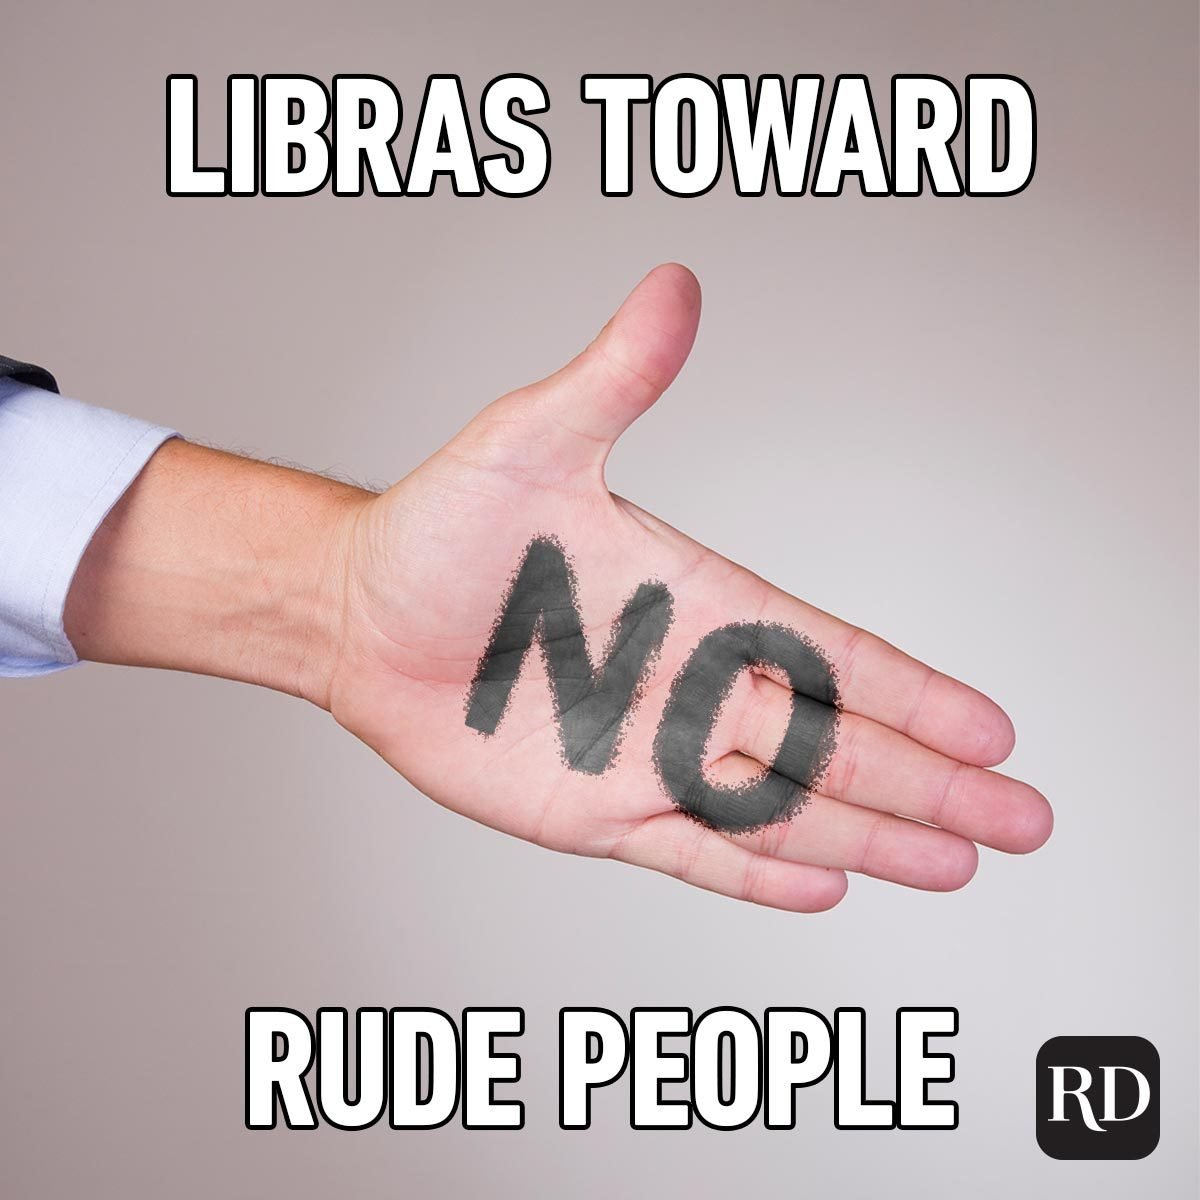 Hilarious Zodiac Memes That'll Crack You Up libra saying no to rude people hand out